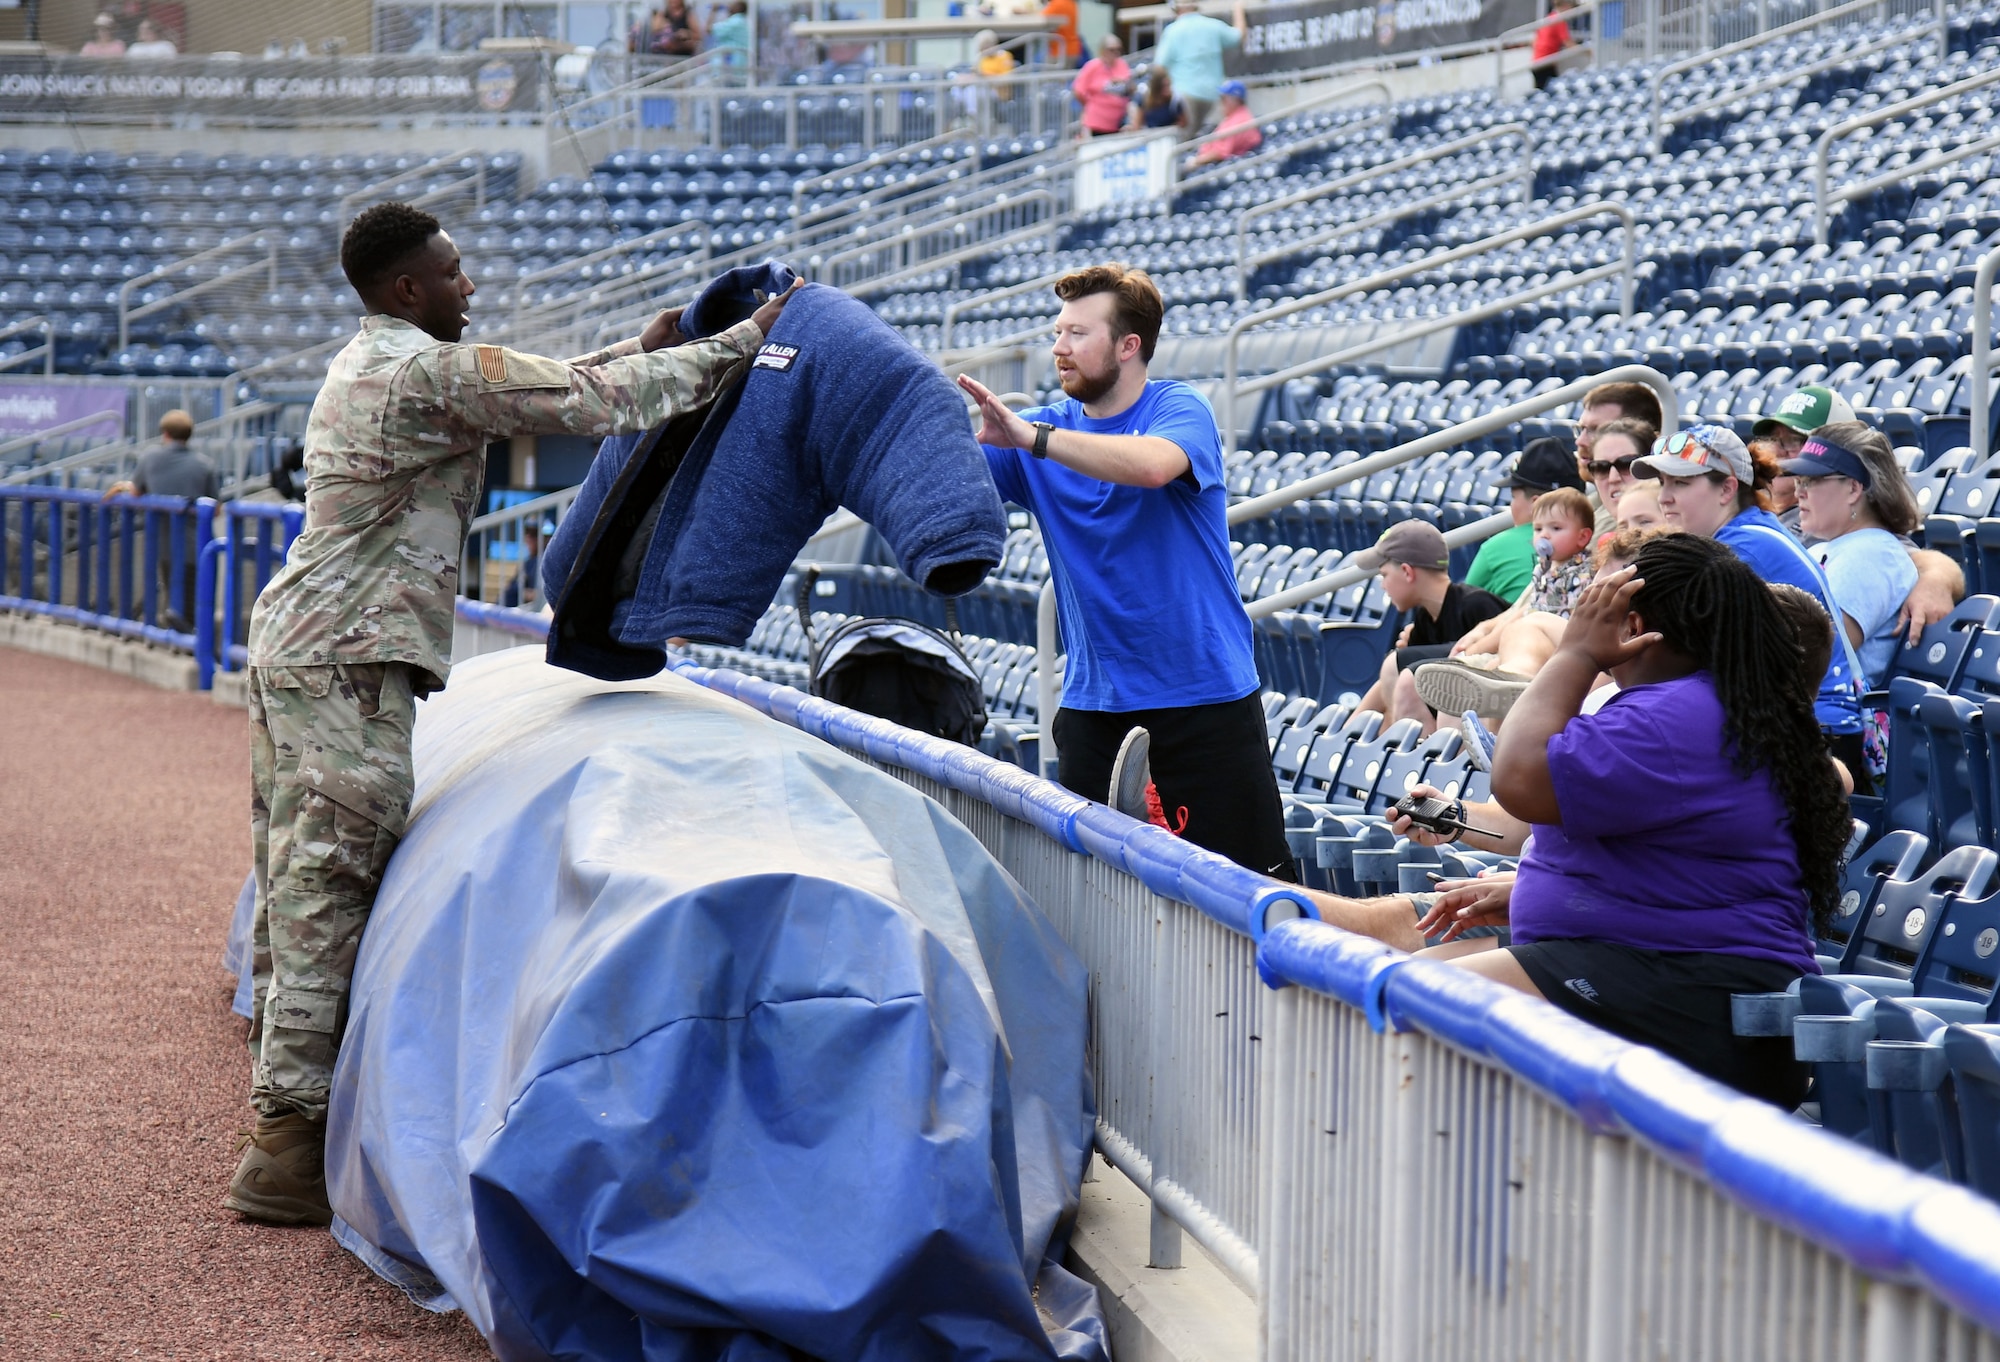 U.S. Air Force Staff Sgt. Victor Henderson, 81st Security Forces Squadron military working dog handler, shows attendees a bite suit following a military working dog demonstration at the MGM Park during a Biloxi Shuckers Minor League Baseball team pre-game festivities in Biloxi, Mississippi, Aug. 1, 2021. The "Bark in the Park" themed baseball game invited fans to attend the game with their dogs. (U.S. Air Force photo by Kemberly Groue)